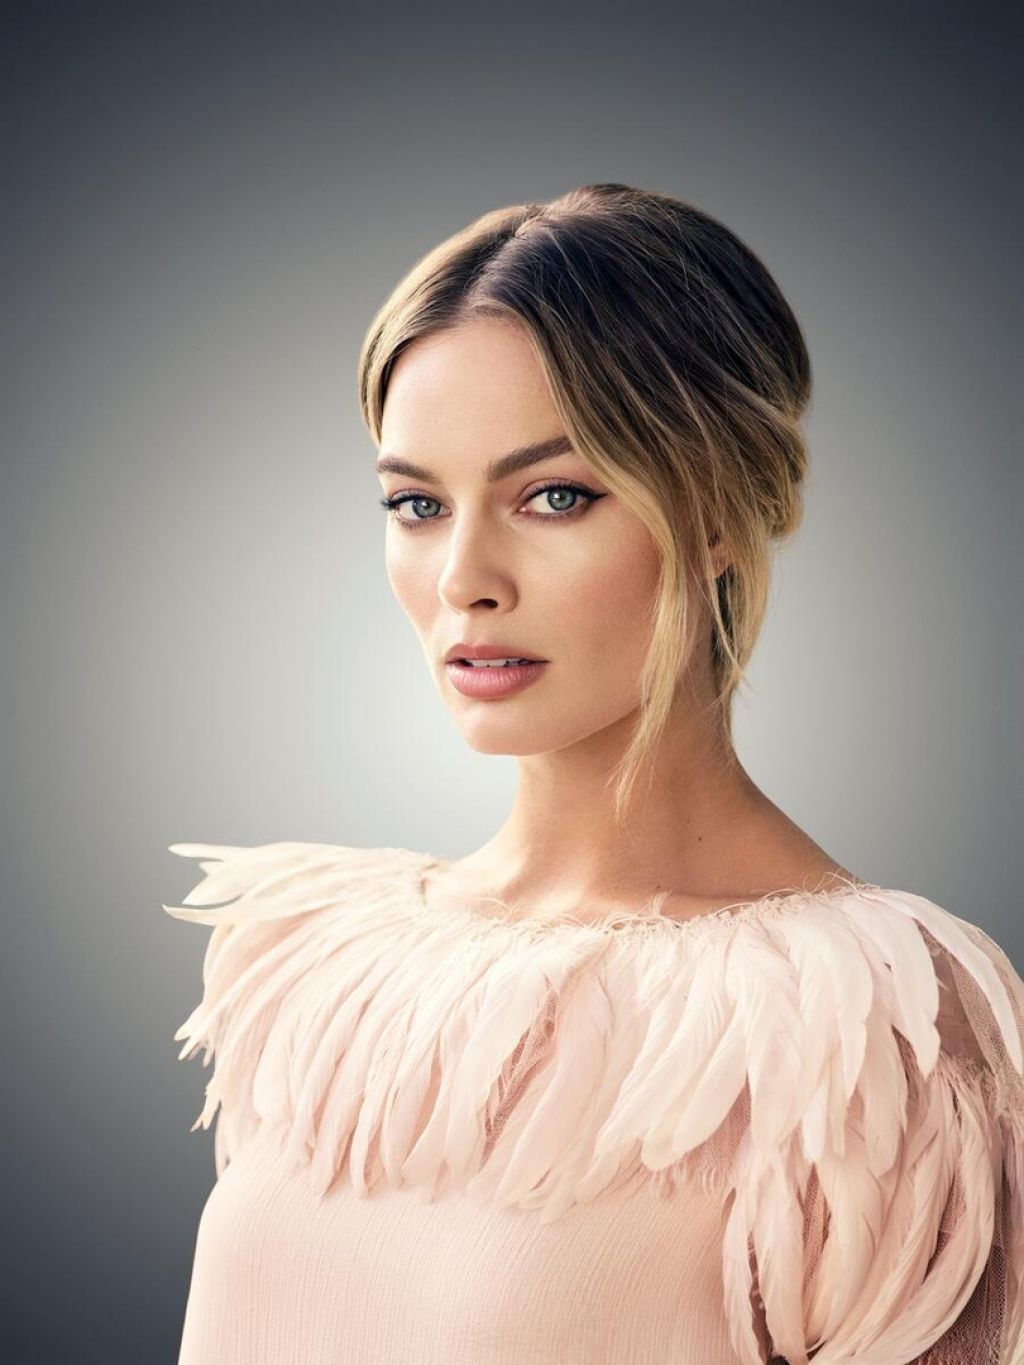 Margot Robbie Once Upon A Time In Hollywood Photoshoot 2020 • Celebmafia